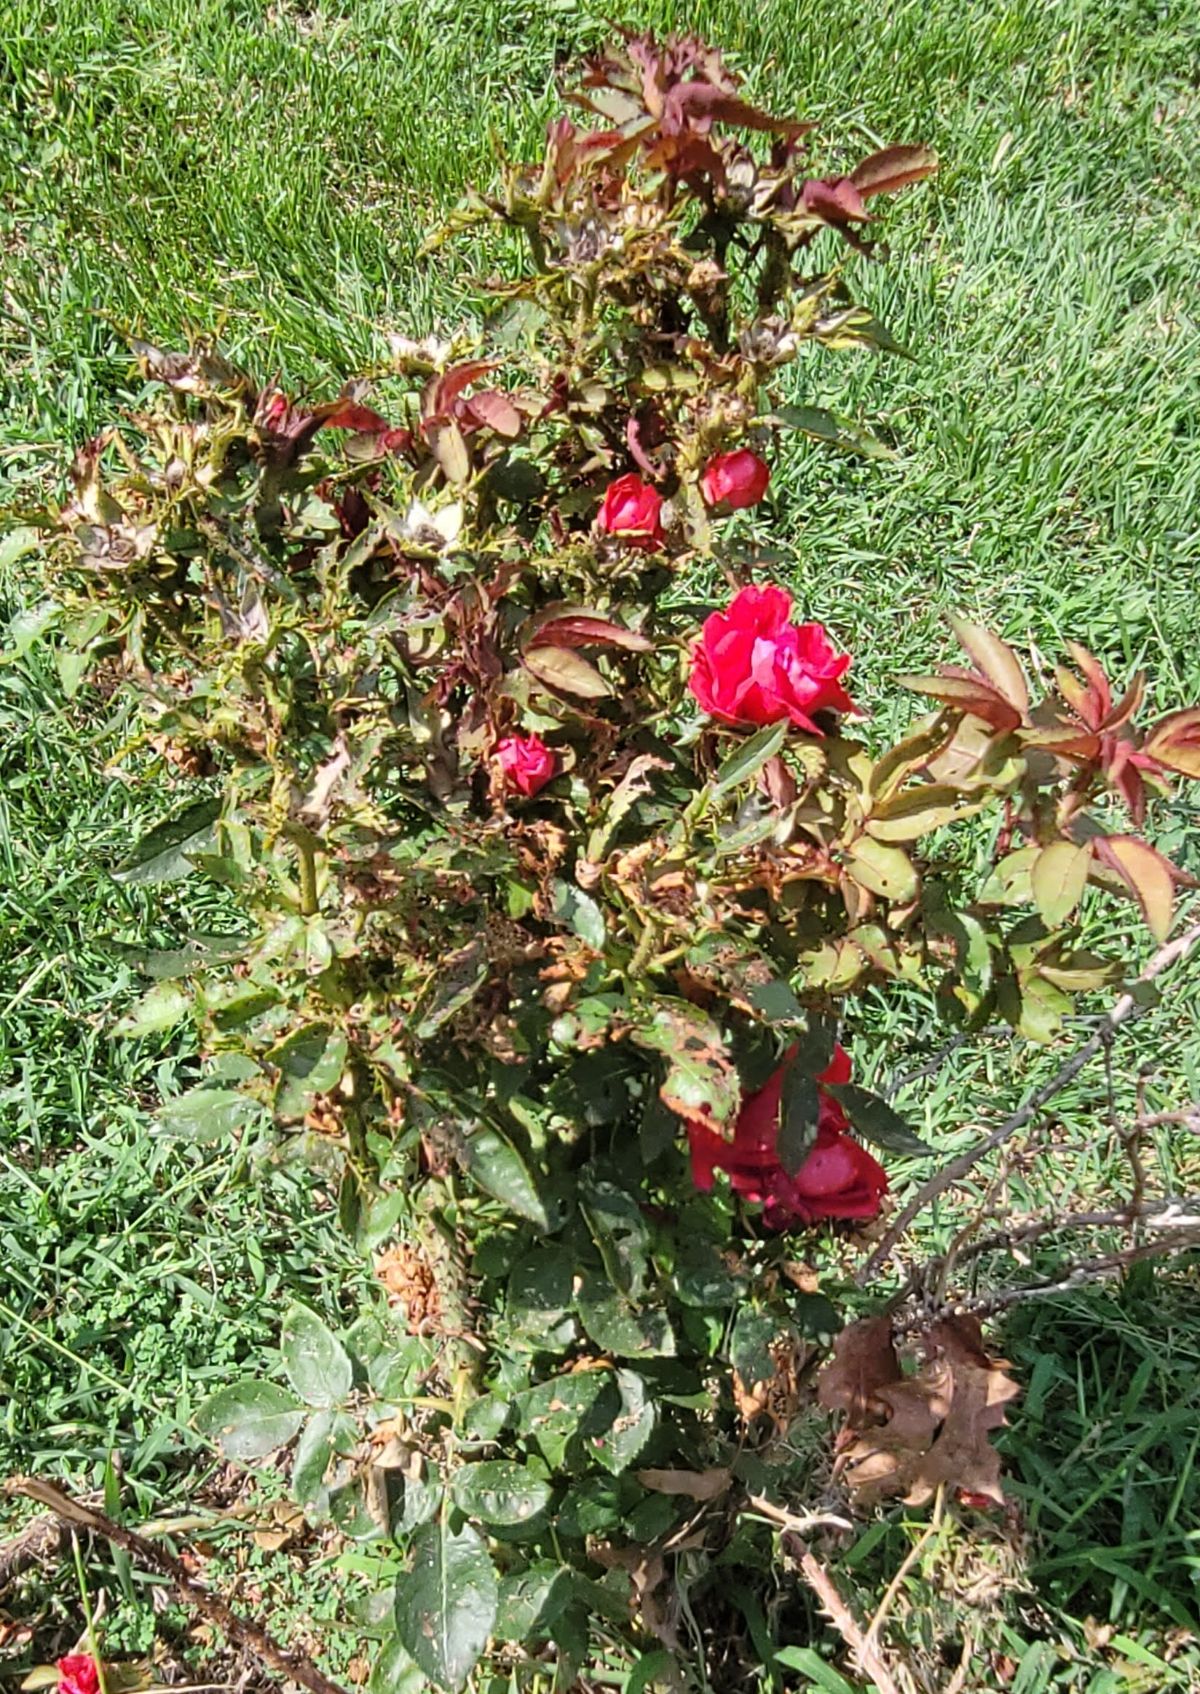 A rose badly infected with rose rosette disease